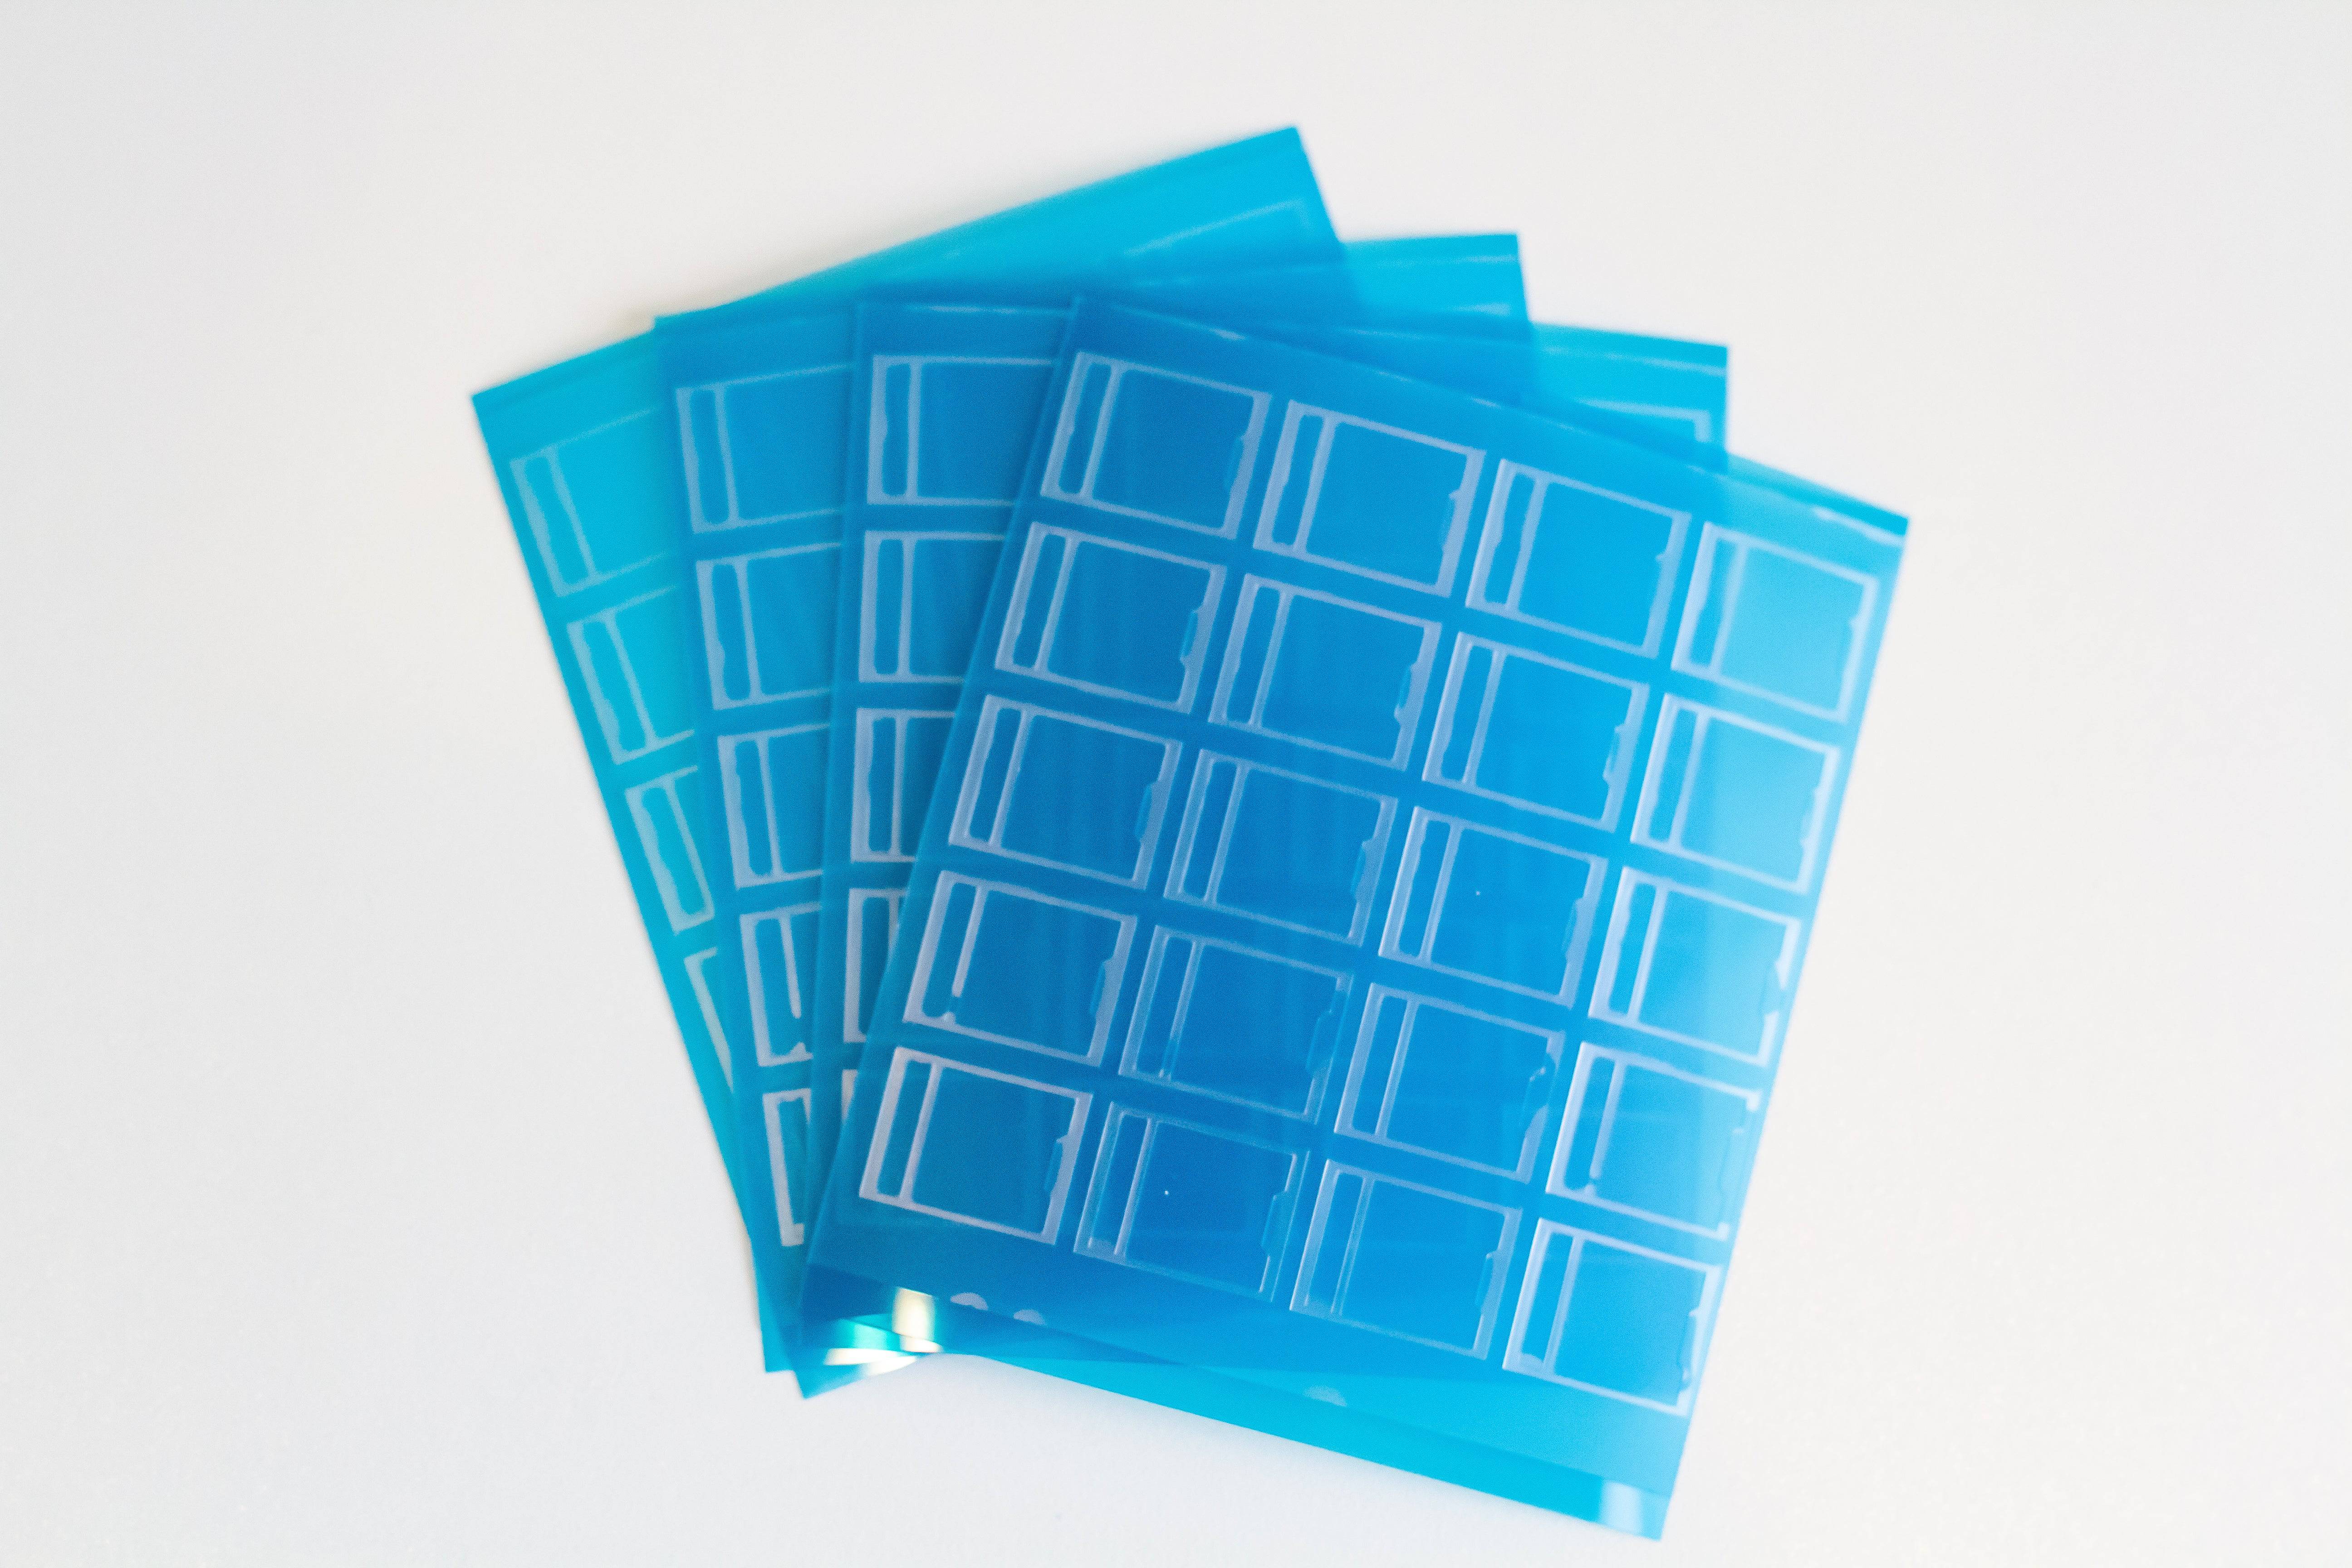 Four sheets of Durock mechanical key switch films with HTV and Polycarbonate material.